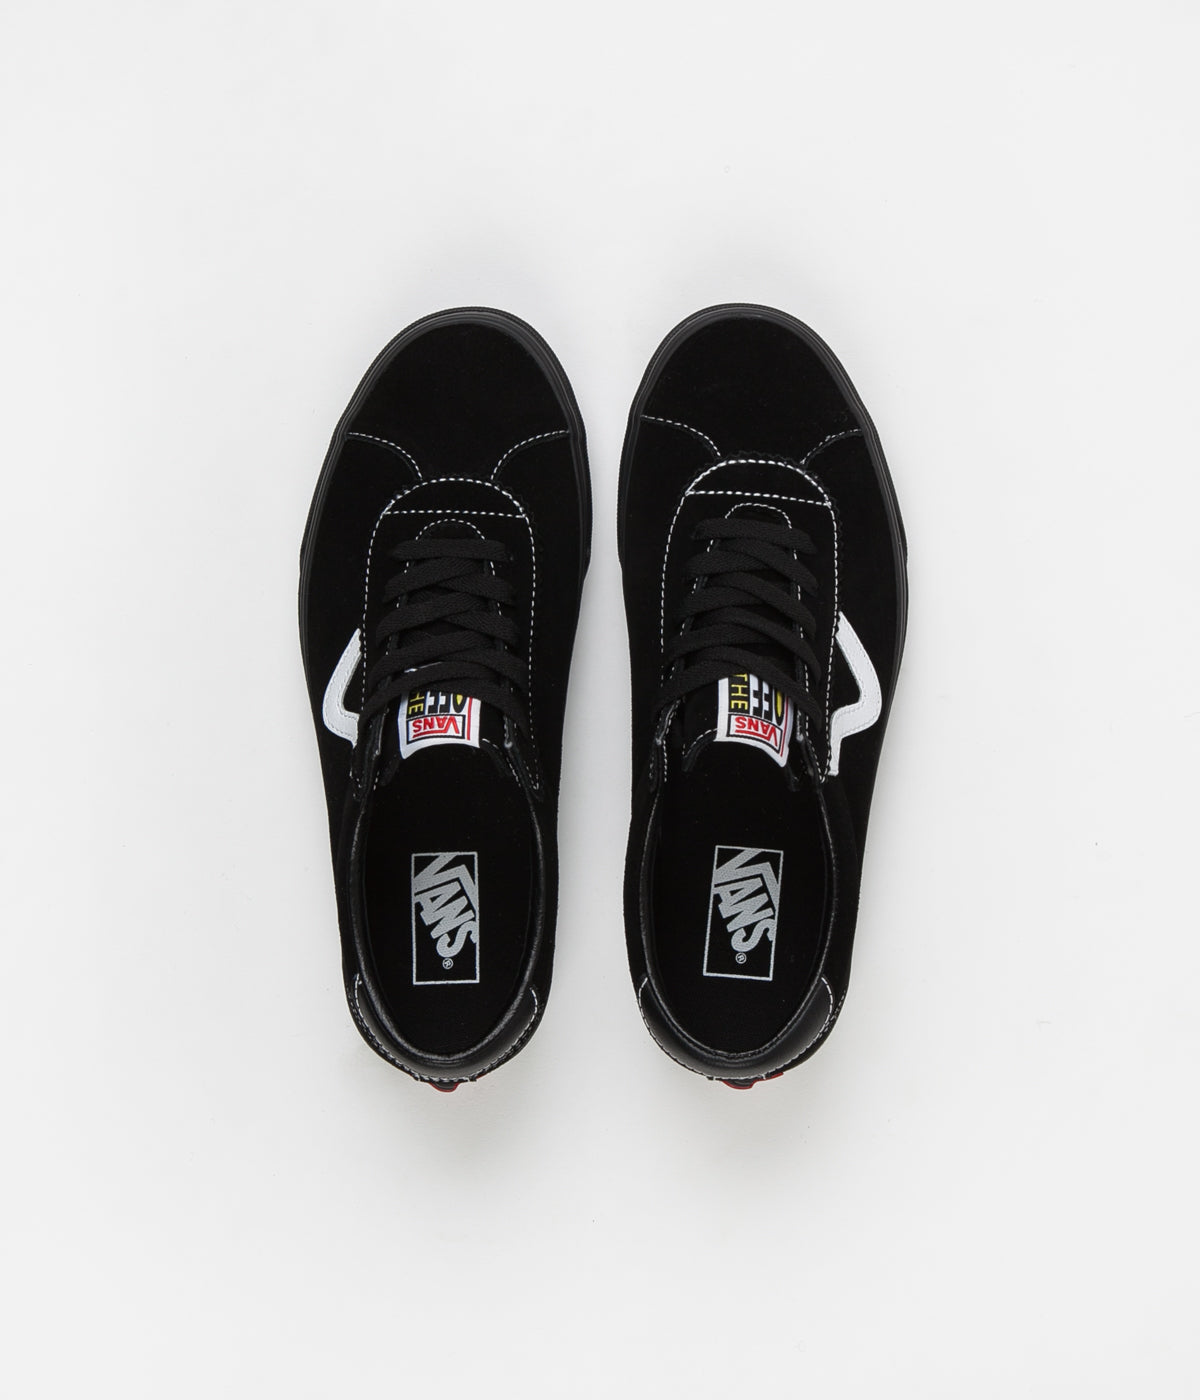 92 Top Vans sport shoes black for Holiday with Family